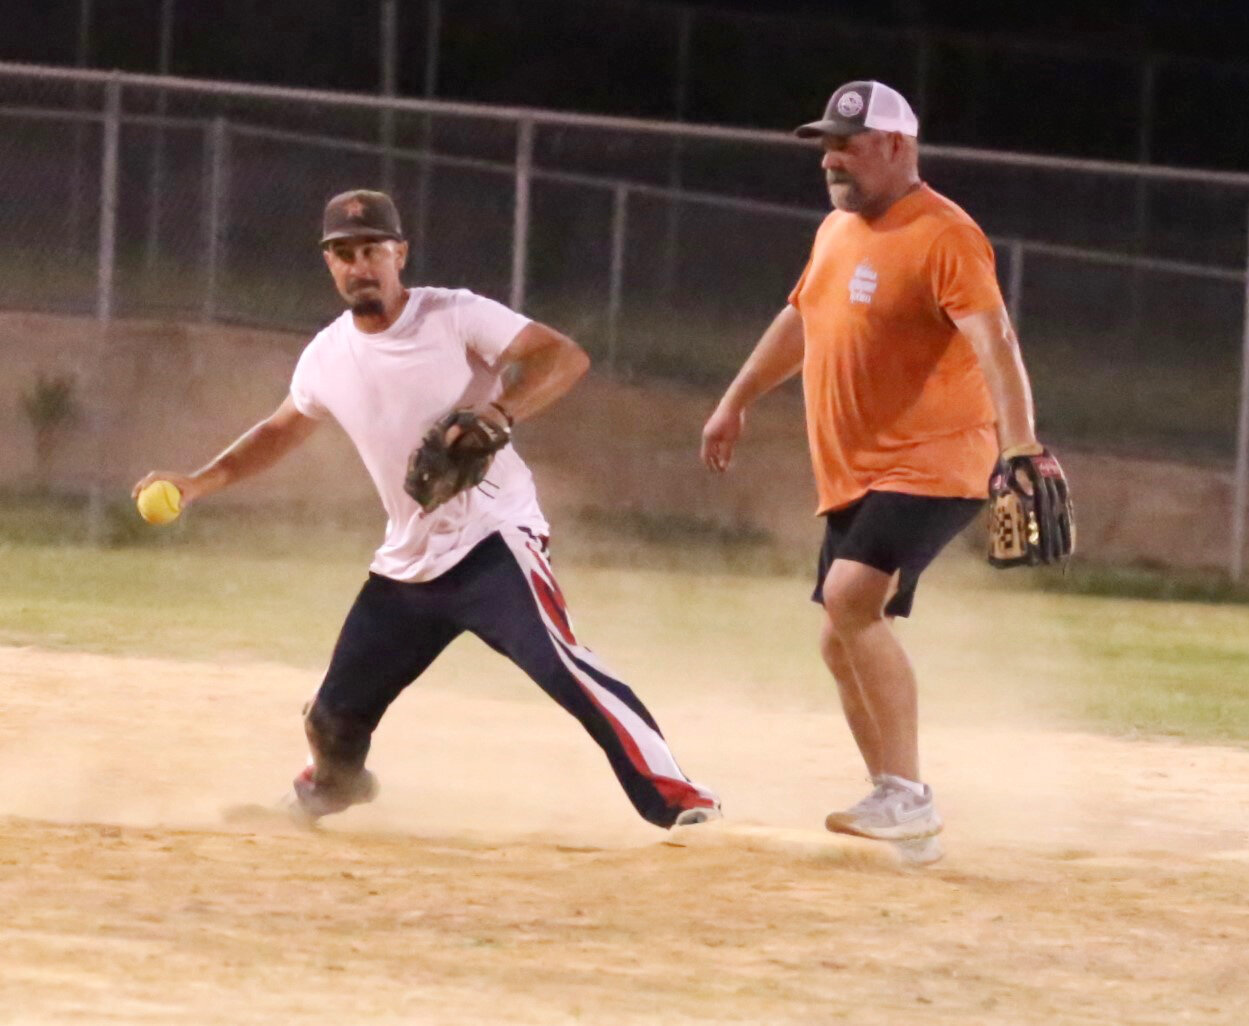 Mineola Fire Department shortstop Justin Clower (left) steps on second for a force out. Second baseman Eric Carrington was ready to take a throw on the play.